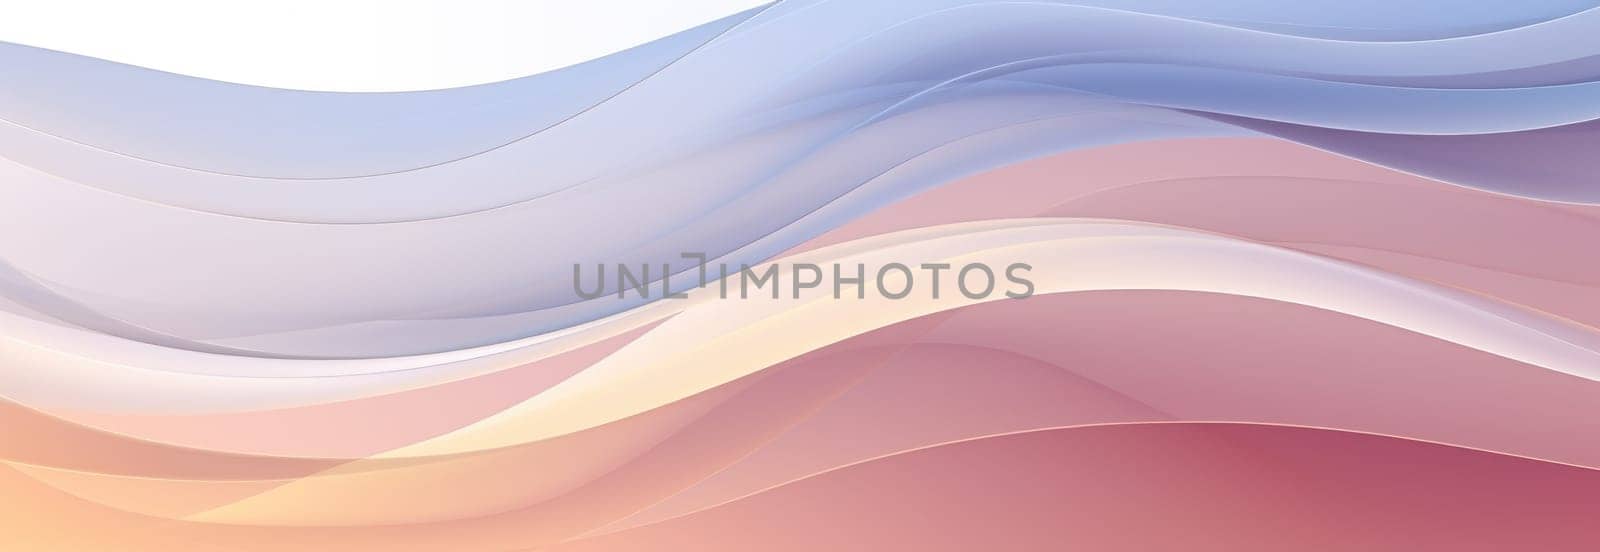 Abstract background with multicoloured wavy lines and shapes in delicate pastel shades